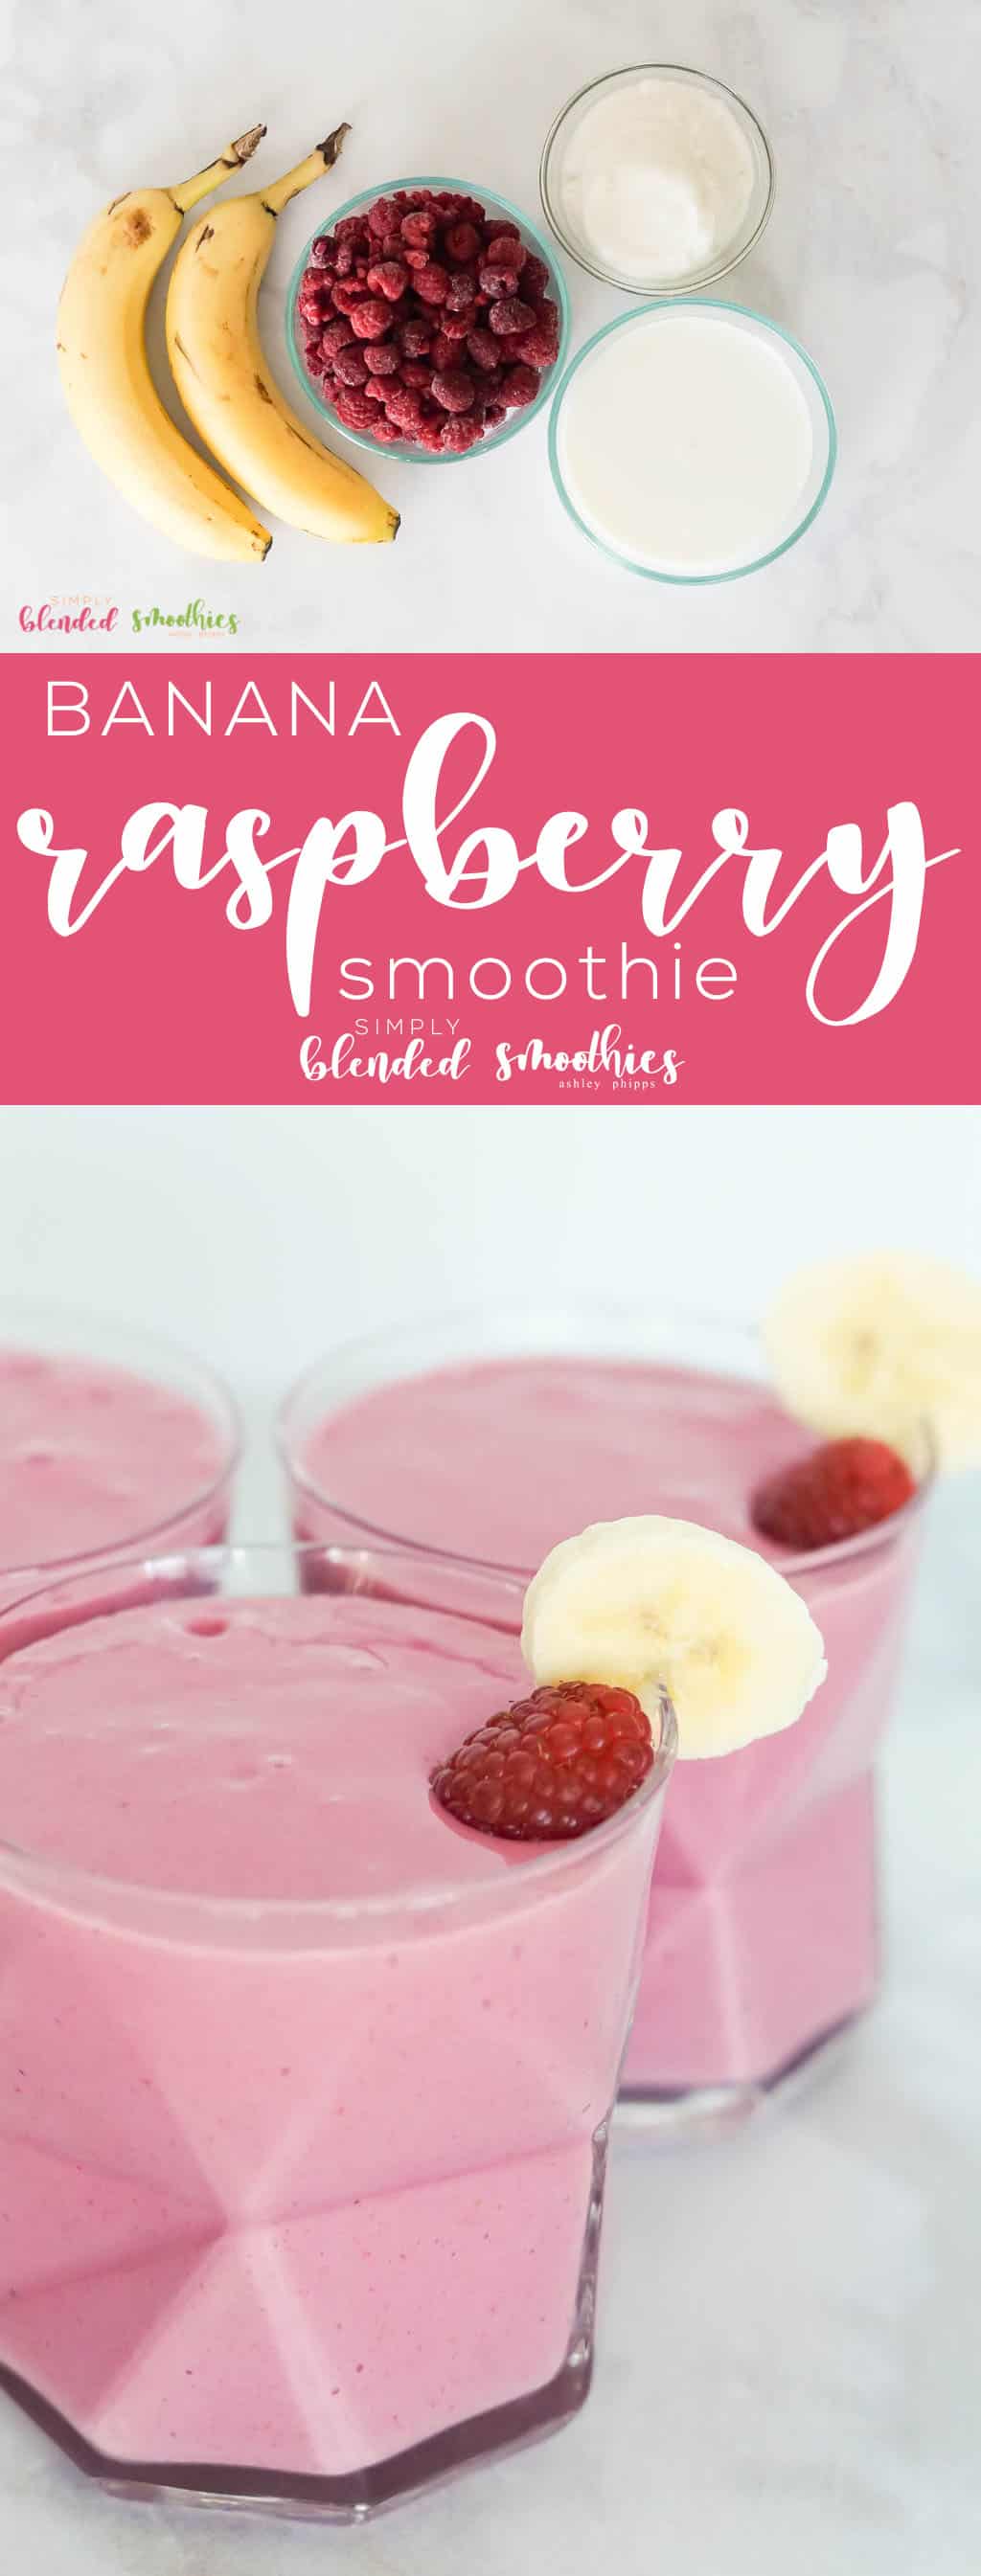 This Raspberry Banana Smoothie Is The Perfect Combination Of Sweet And Tart For A Delicious And Healthy Smoothie